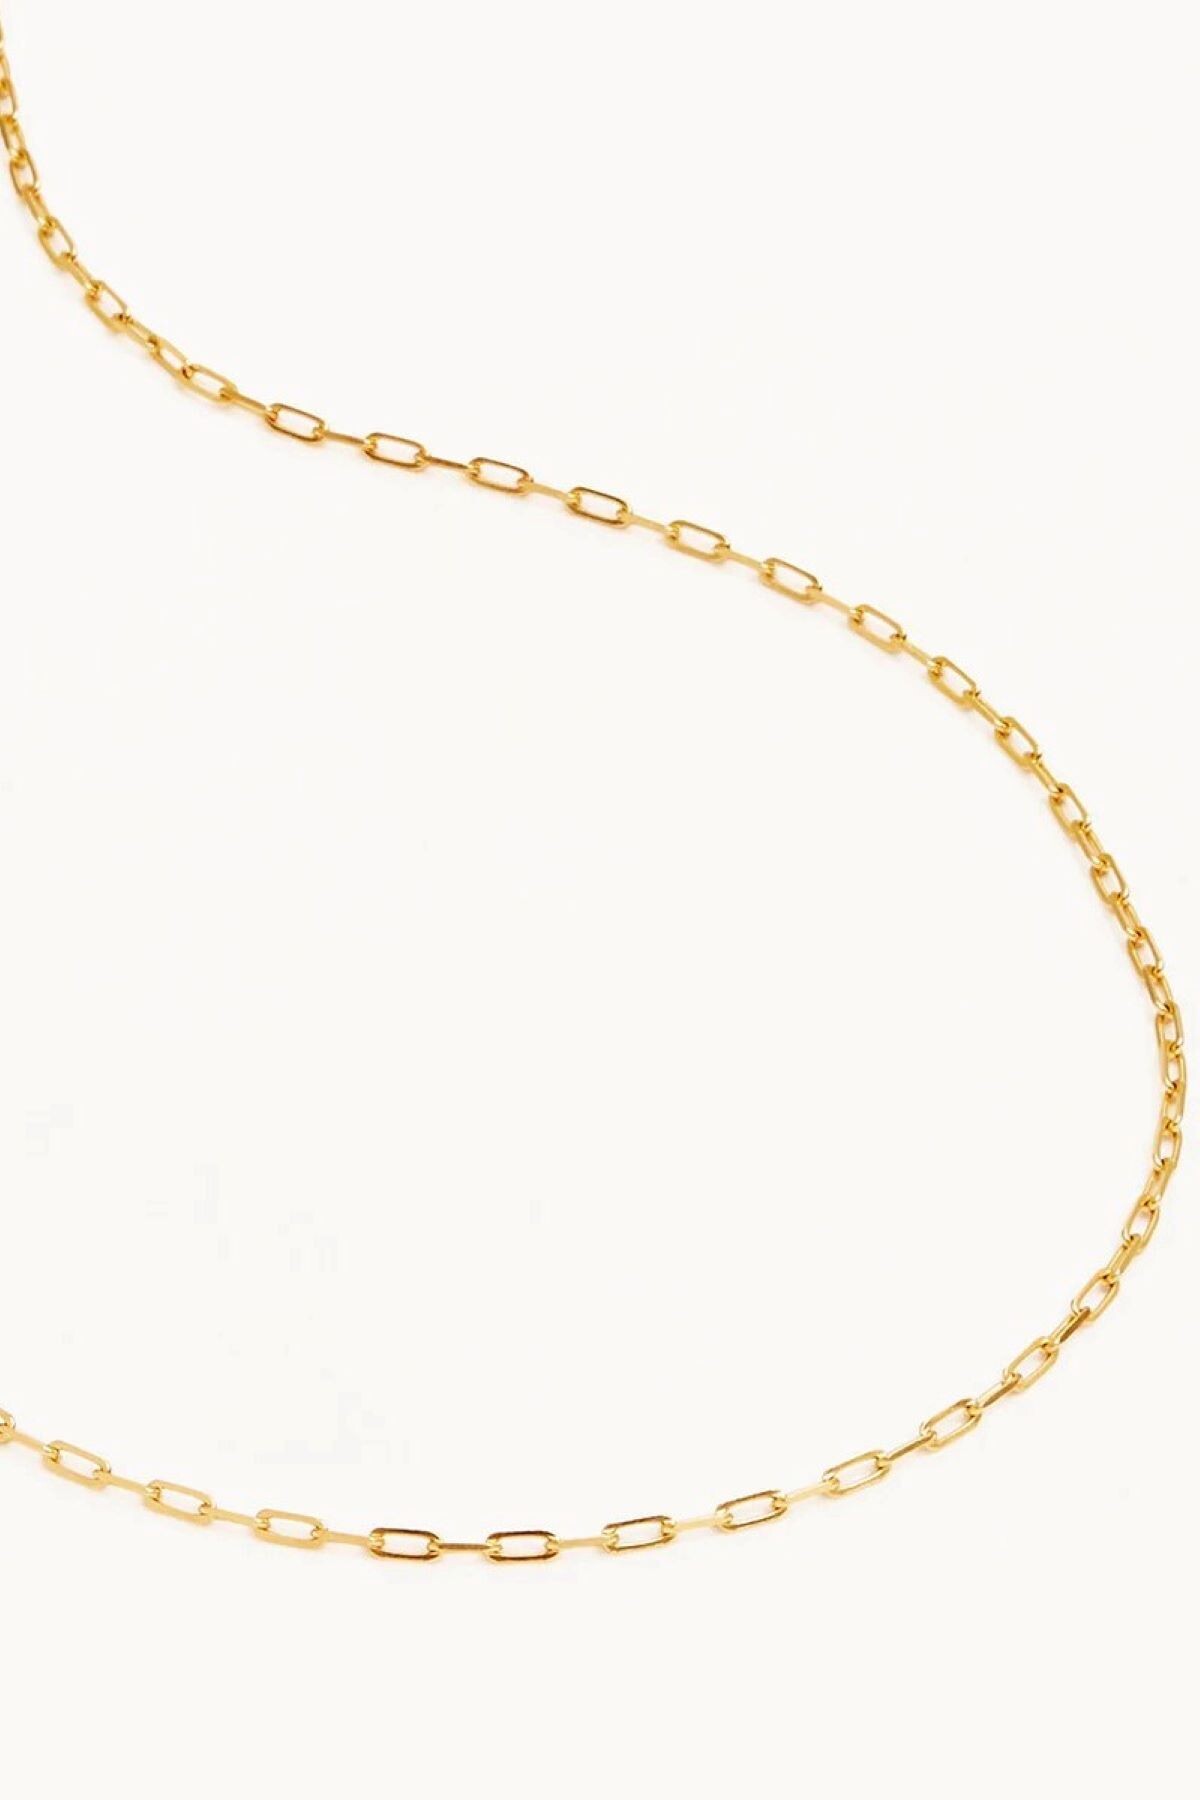 Enamel Color Gold Chunky Chain with Screw Link Clasp 18K Necklace – Wynwood  Shop